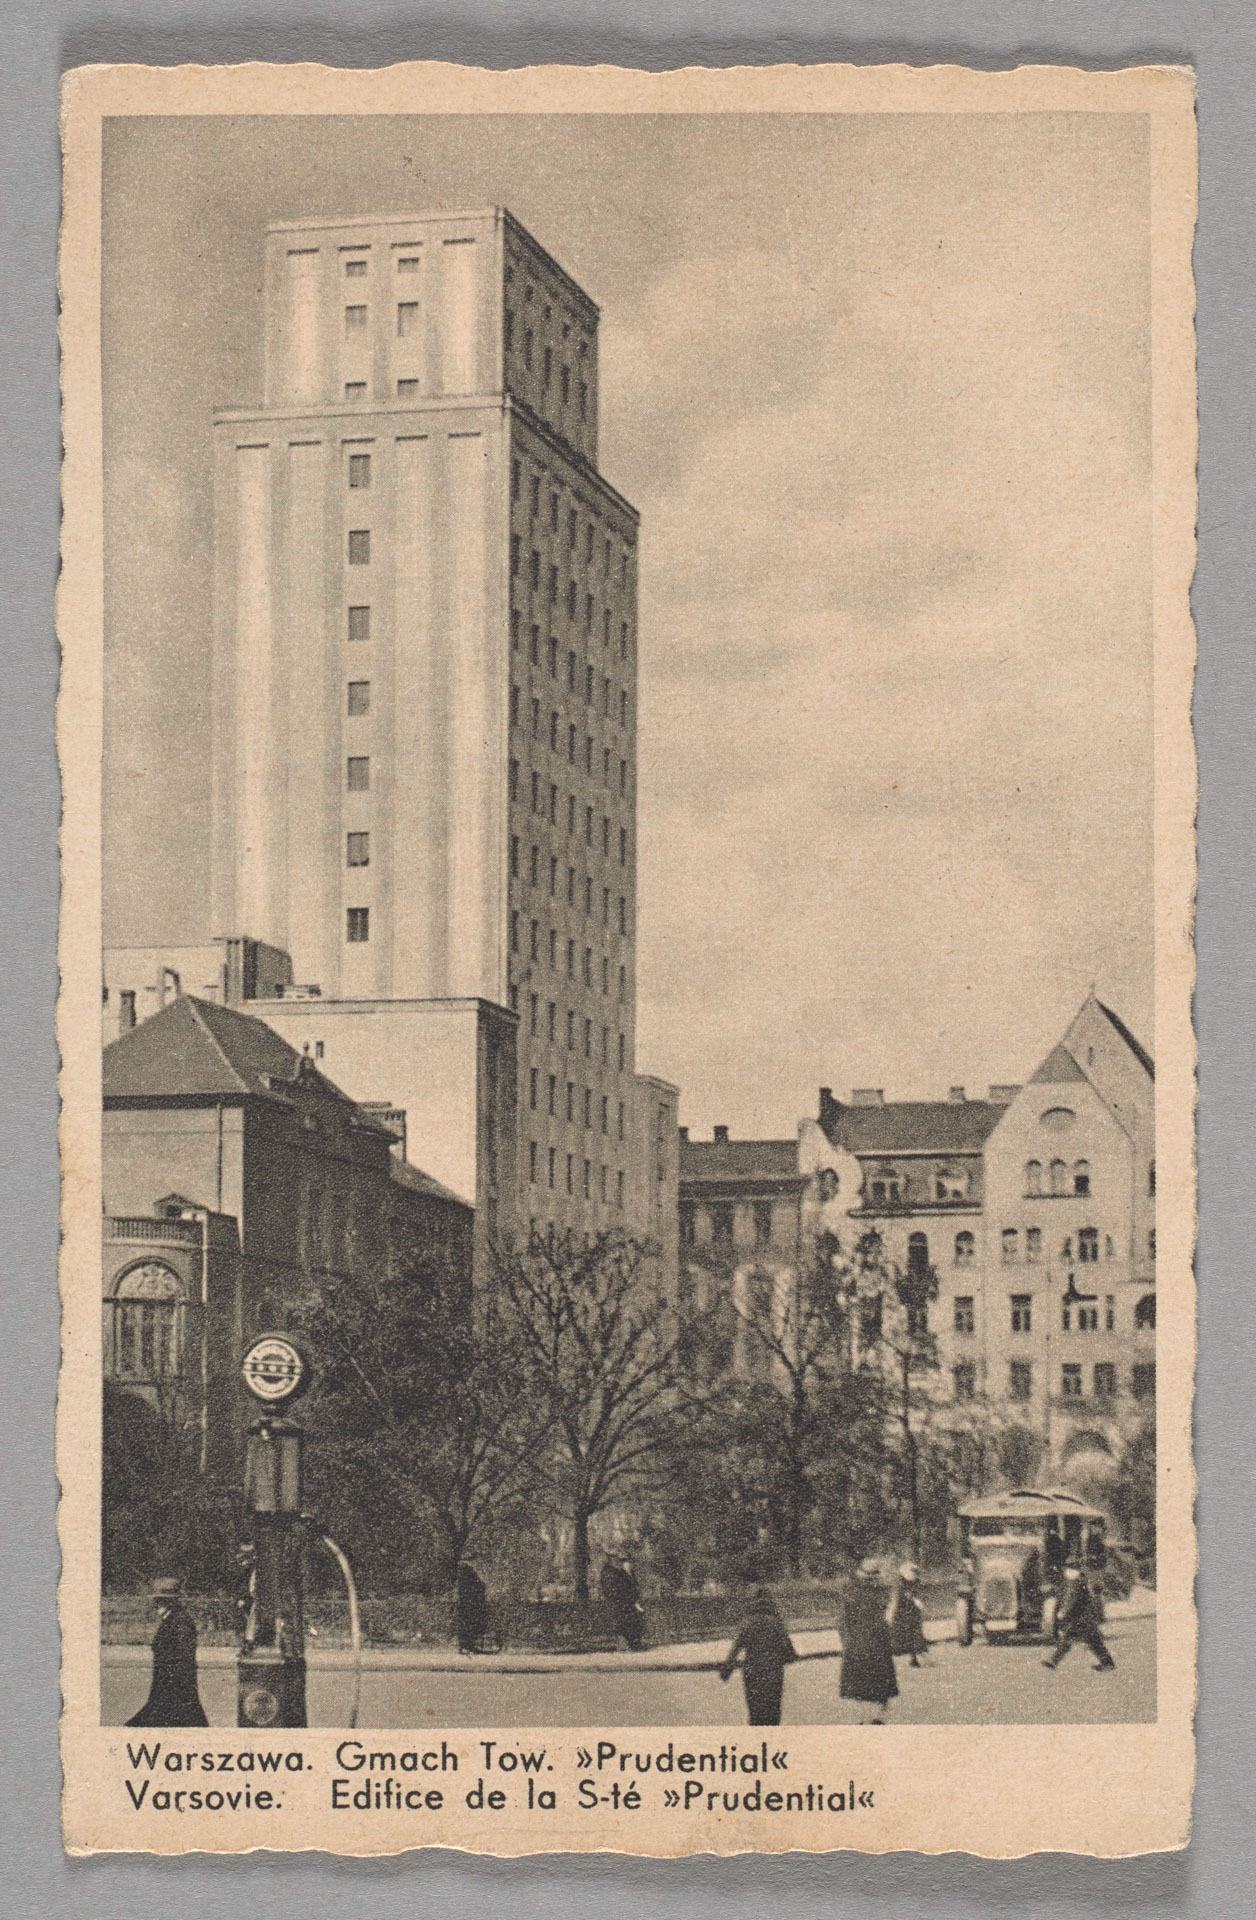 The building of the “Prudential” Insurance Company, around 1937, today Warszawa Hotel, property of the Museum of Warsaw